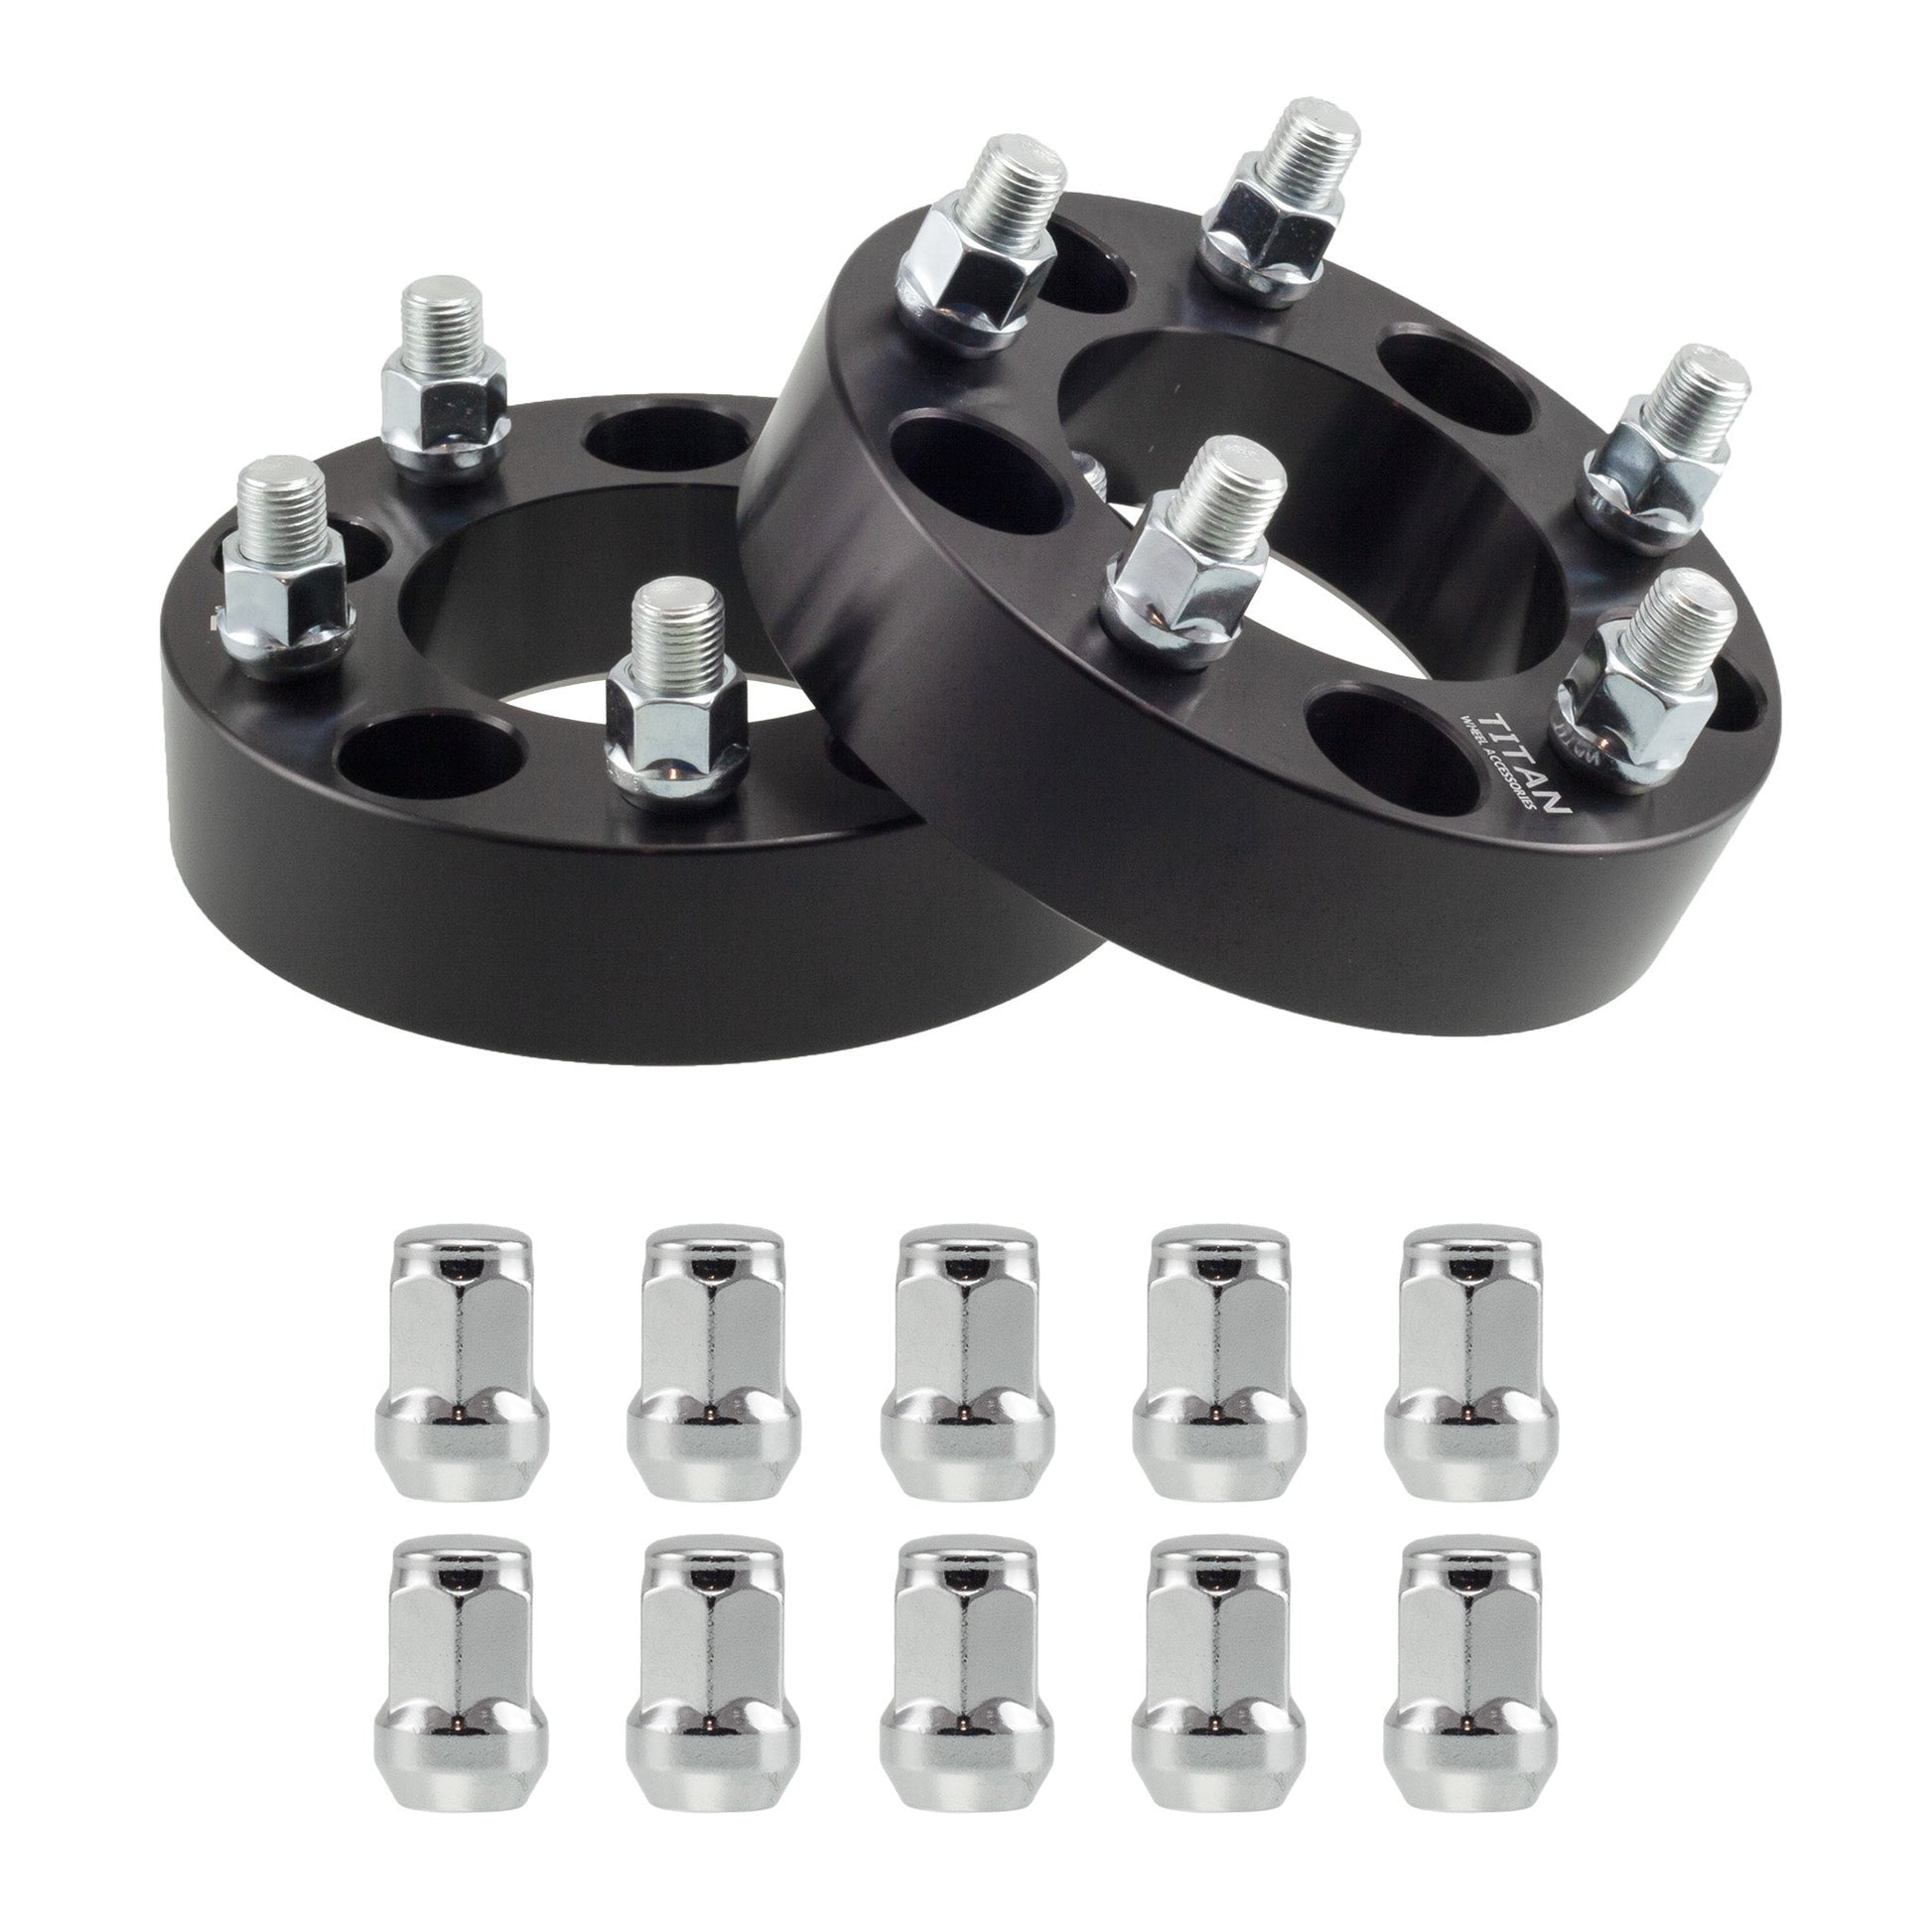 2" (50mm) Titan Wheel Spacers for Dodge Charger Challenger Magnum Chrysler 300 | 5x4.5 (5x114.3) | 71.5 Hubcentric |14x1.5 Studs | Titan Wheel Accessories